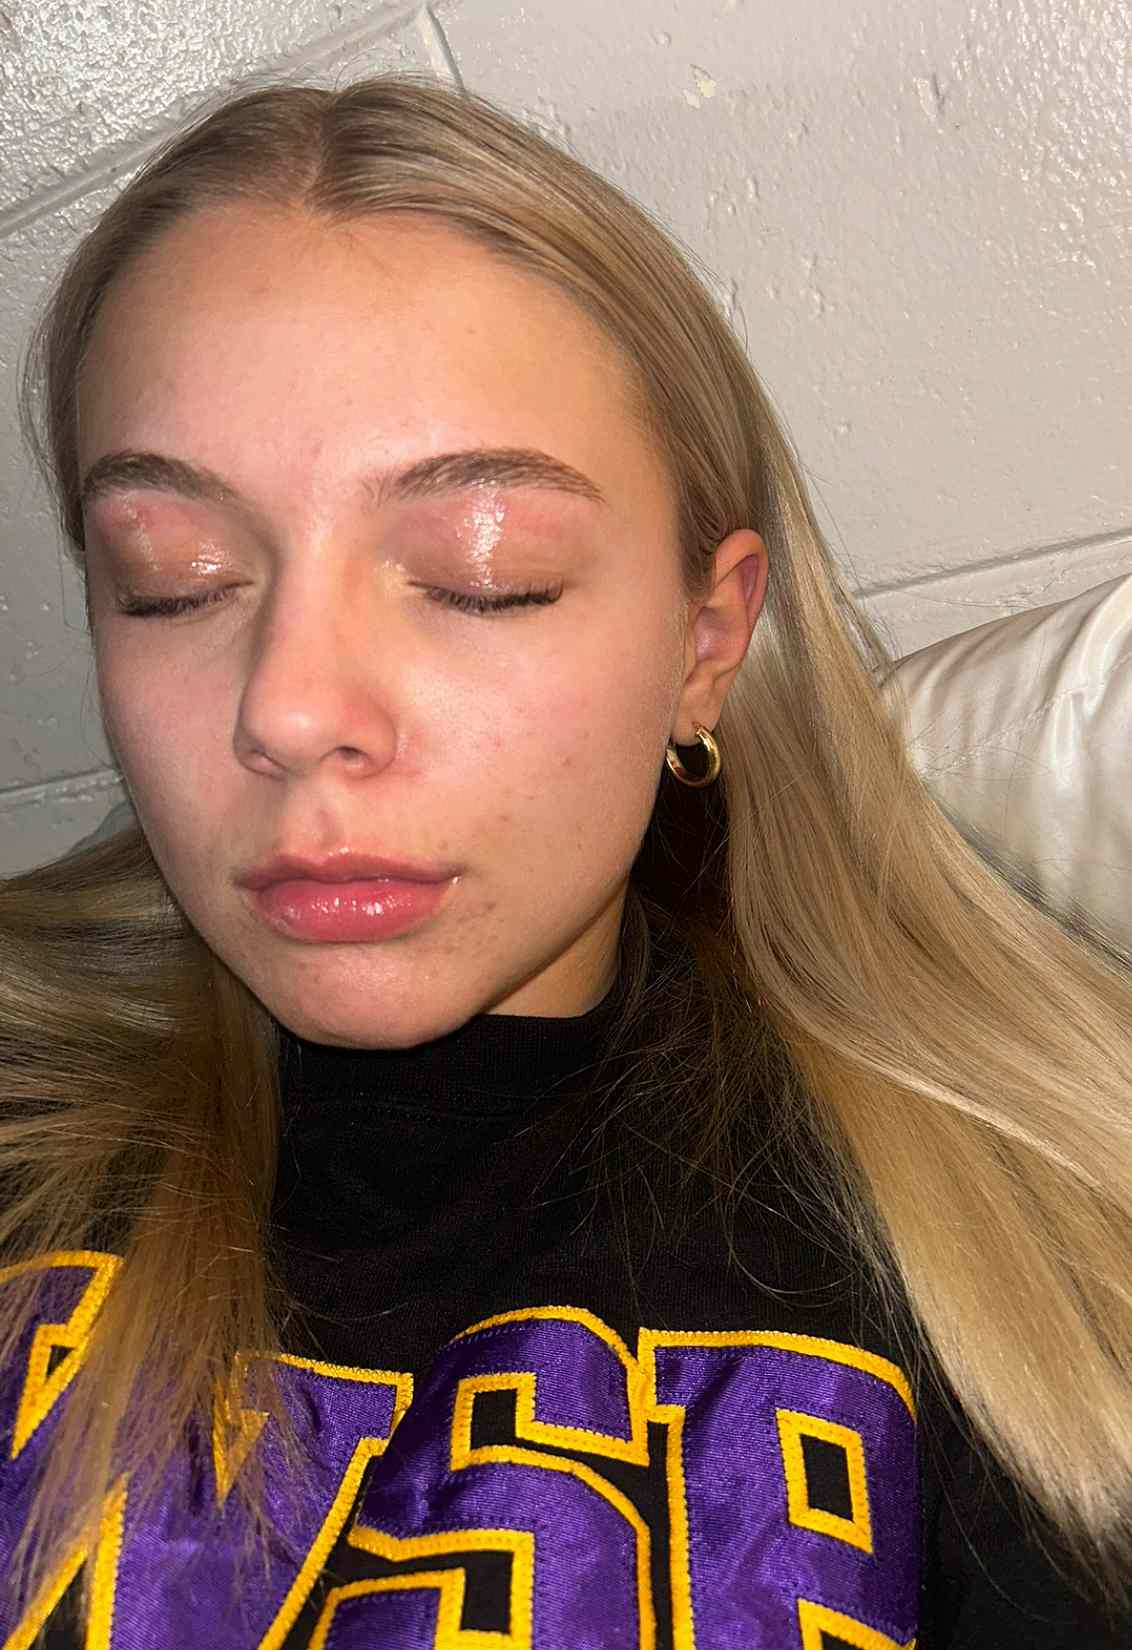 Abbie O'Connor Emerges from Eyebrow Wax with Burns and Discovers Acne Medication Is to Blame